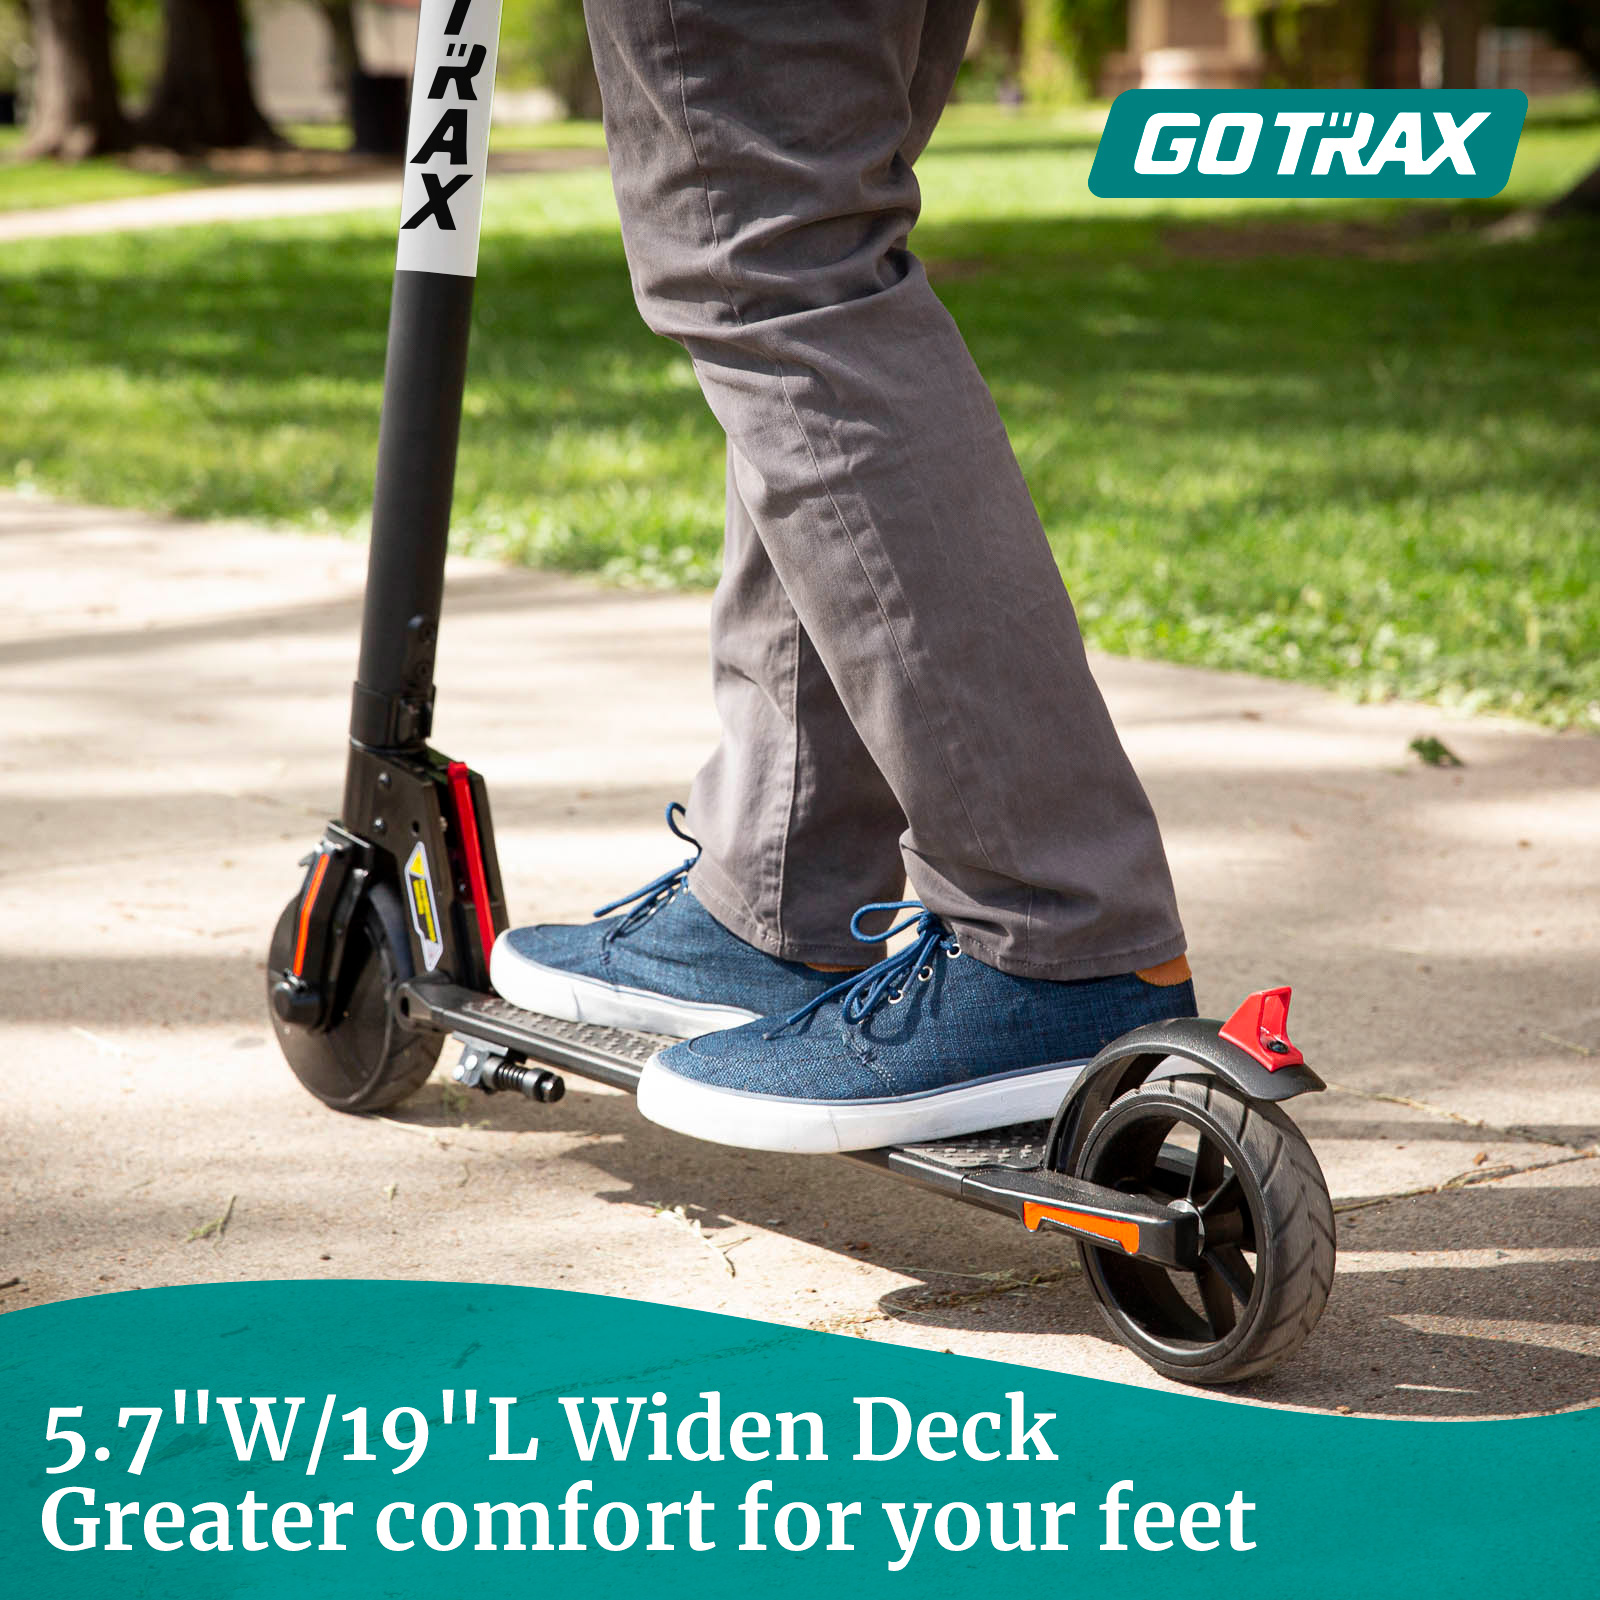 GOTRAX G2 Foldable Electric Scooter for Teens Age of 8+ with 6.5" Solid Tires 200W up 15.5mph, Black - image 5 of 8